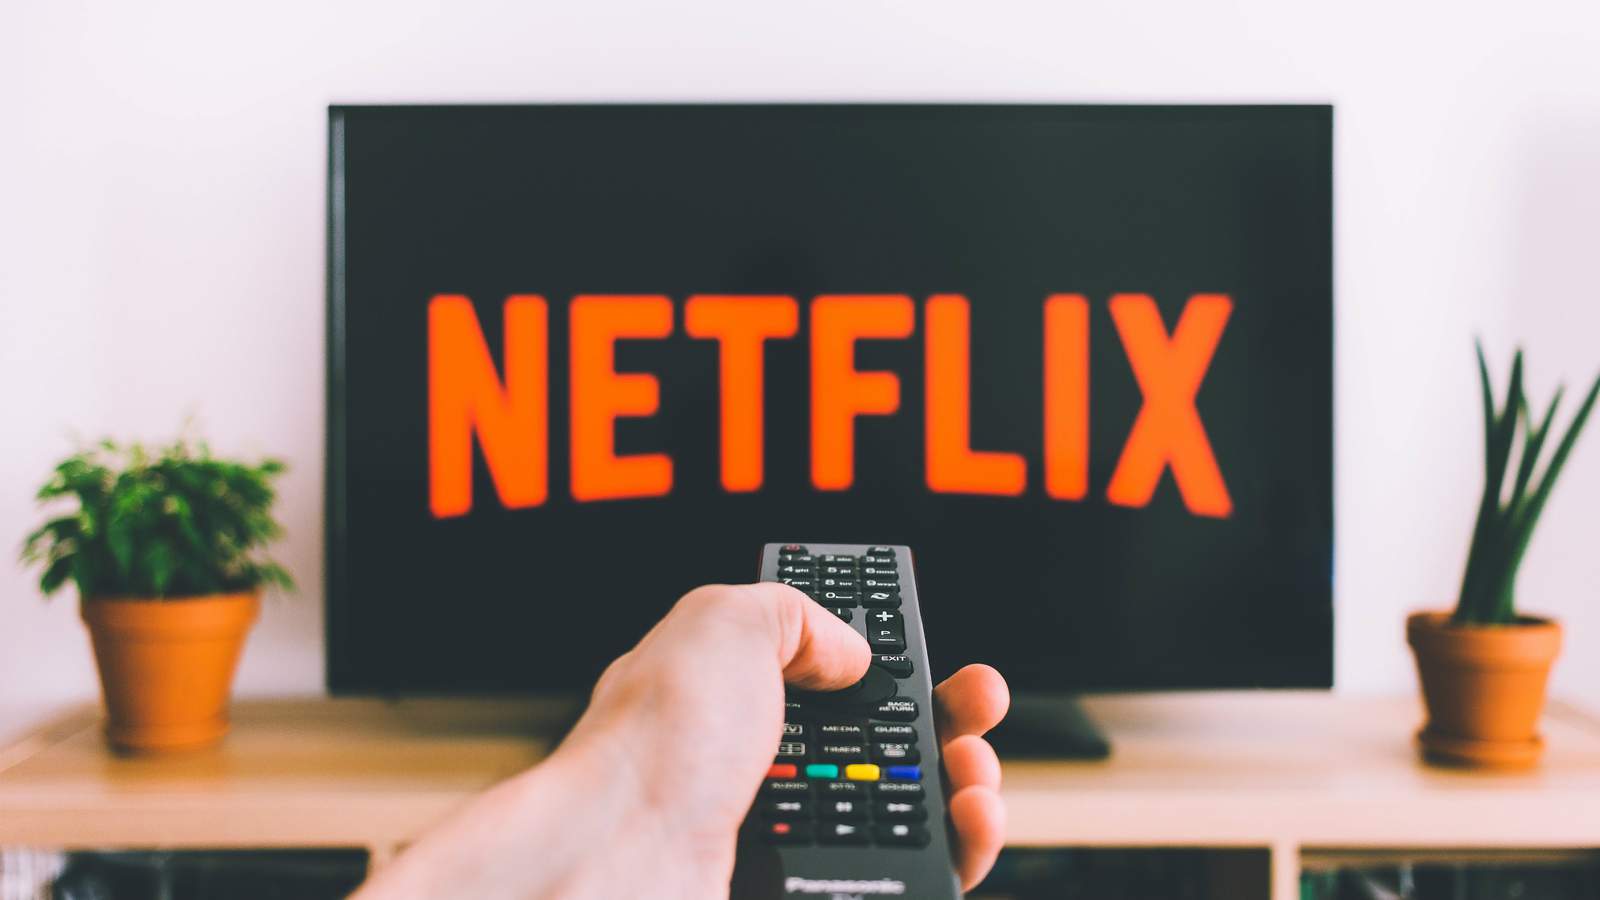 Nothing new to watch on Netflix? Think again